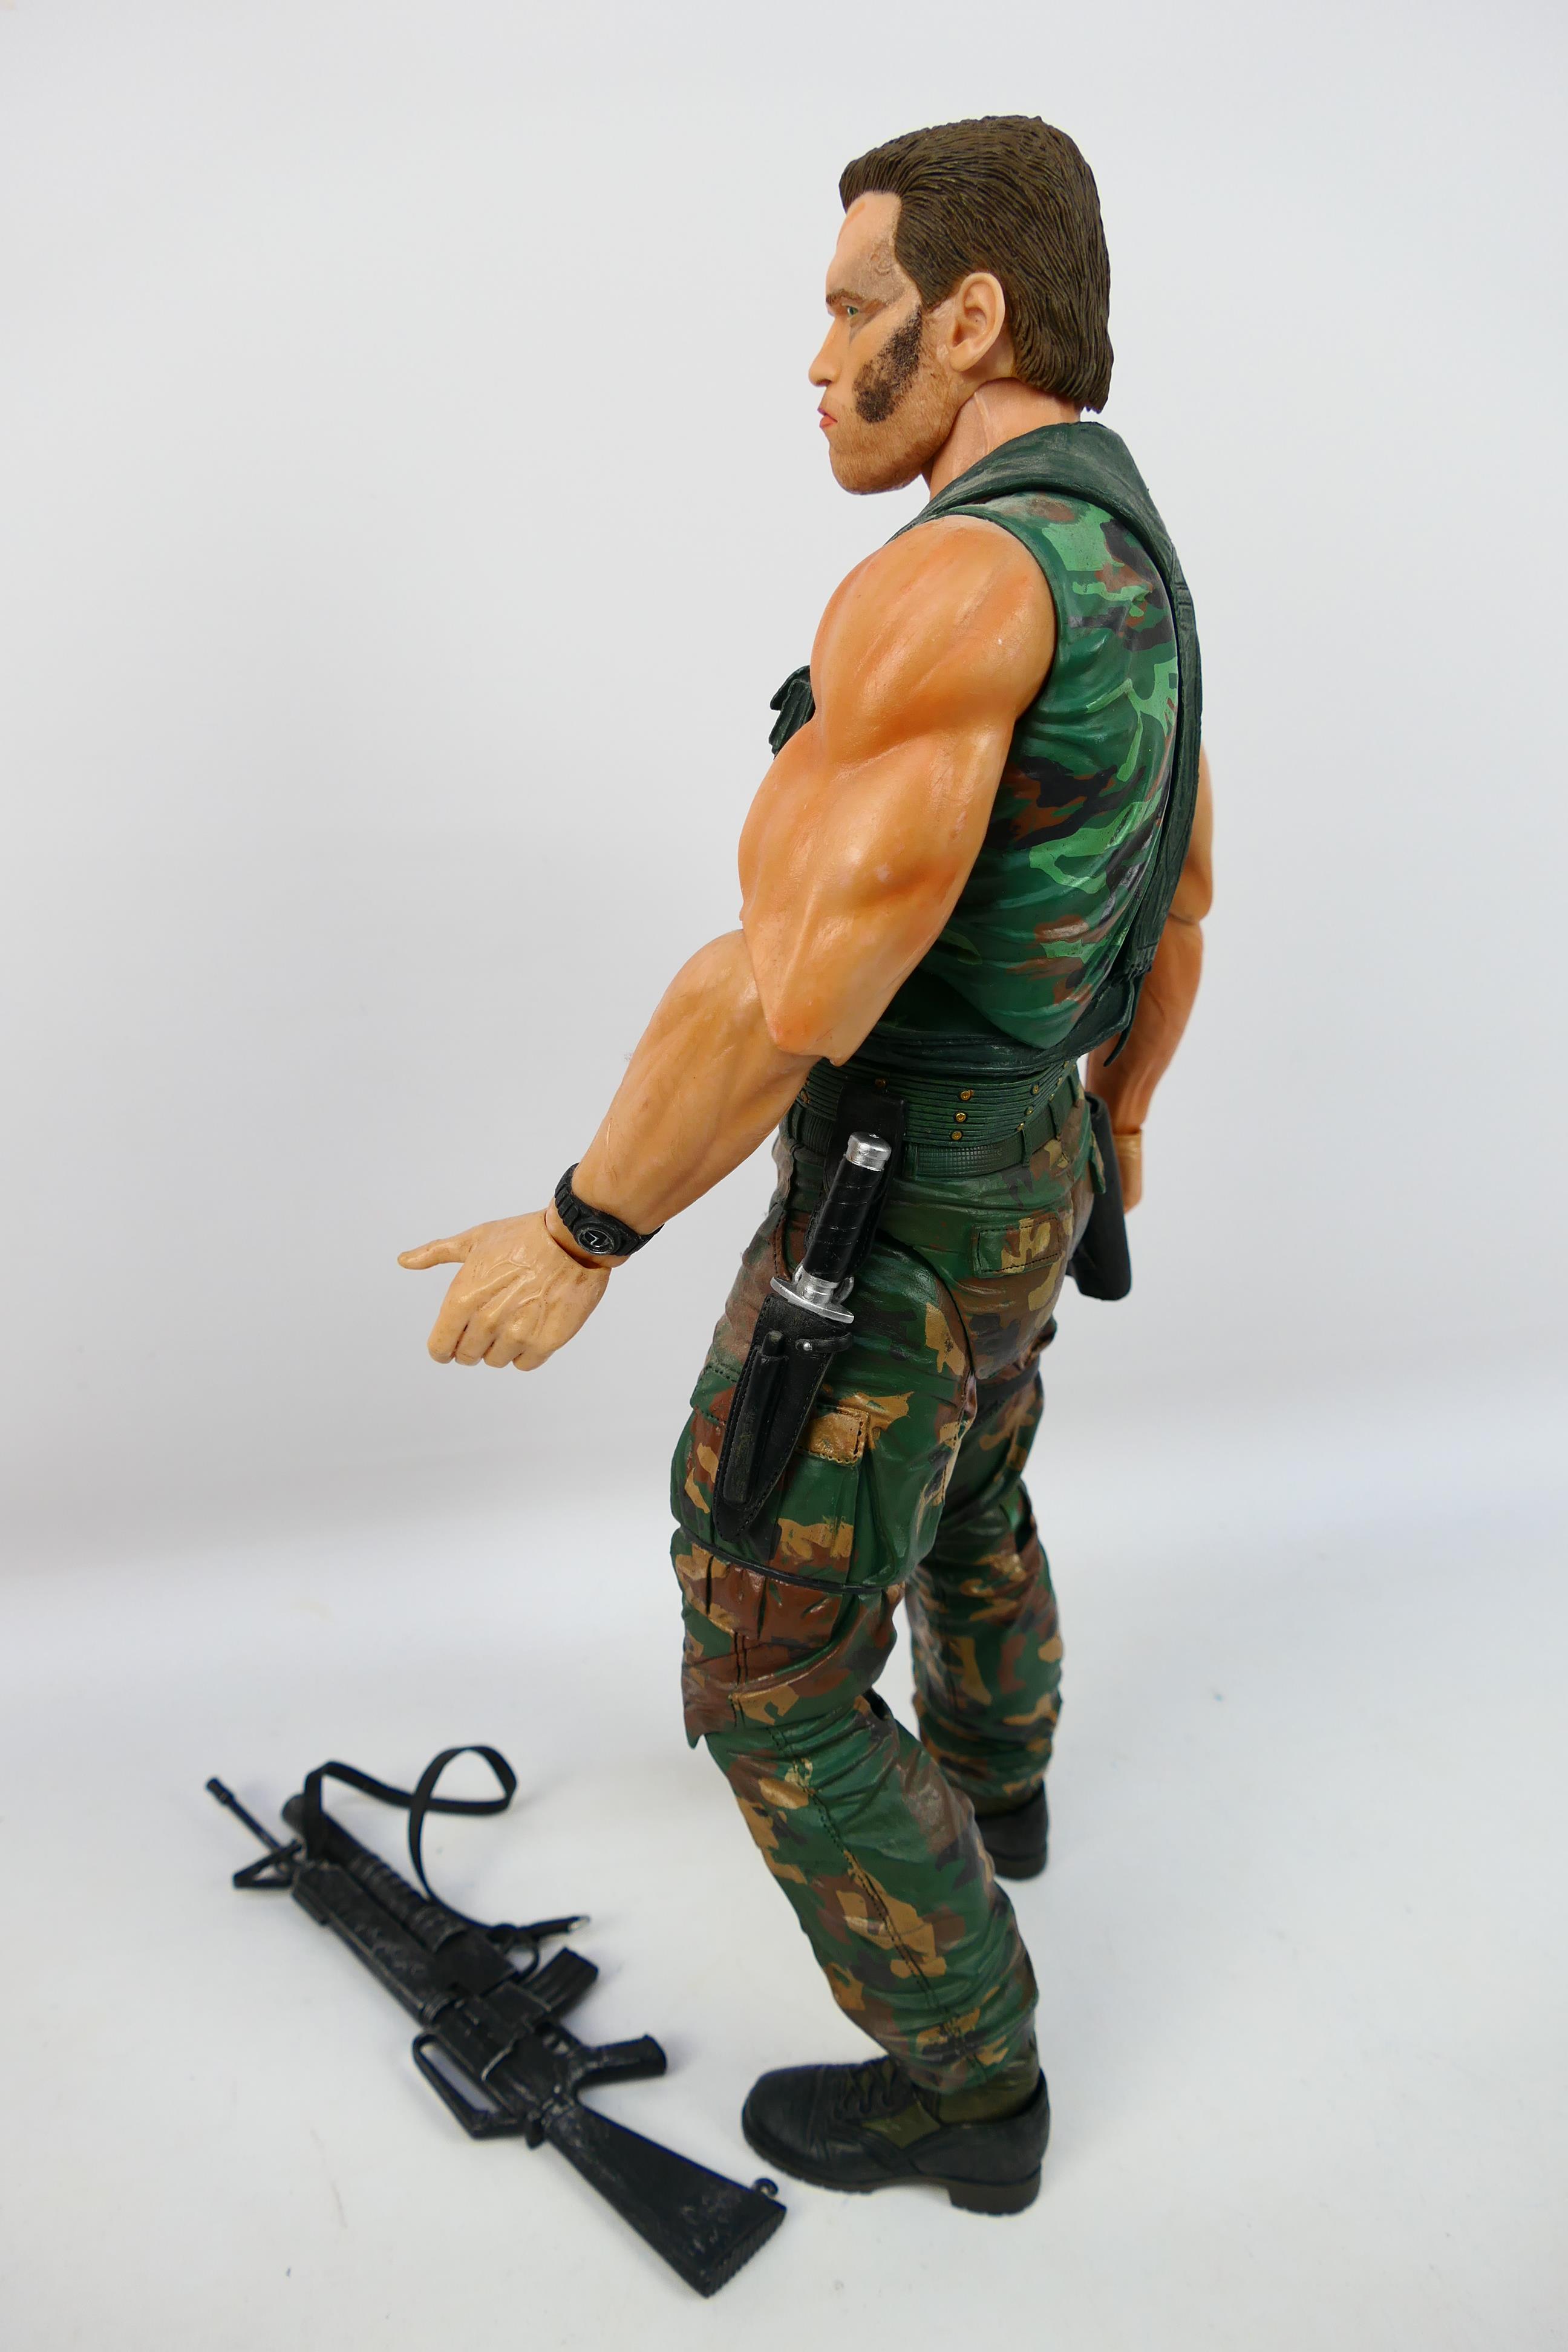 NECA - A 1:4 scale Dutch Action Figure (2013) based of the 1987 Predator film. - Image 7 of 8